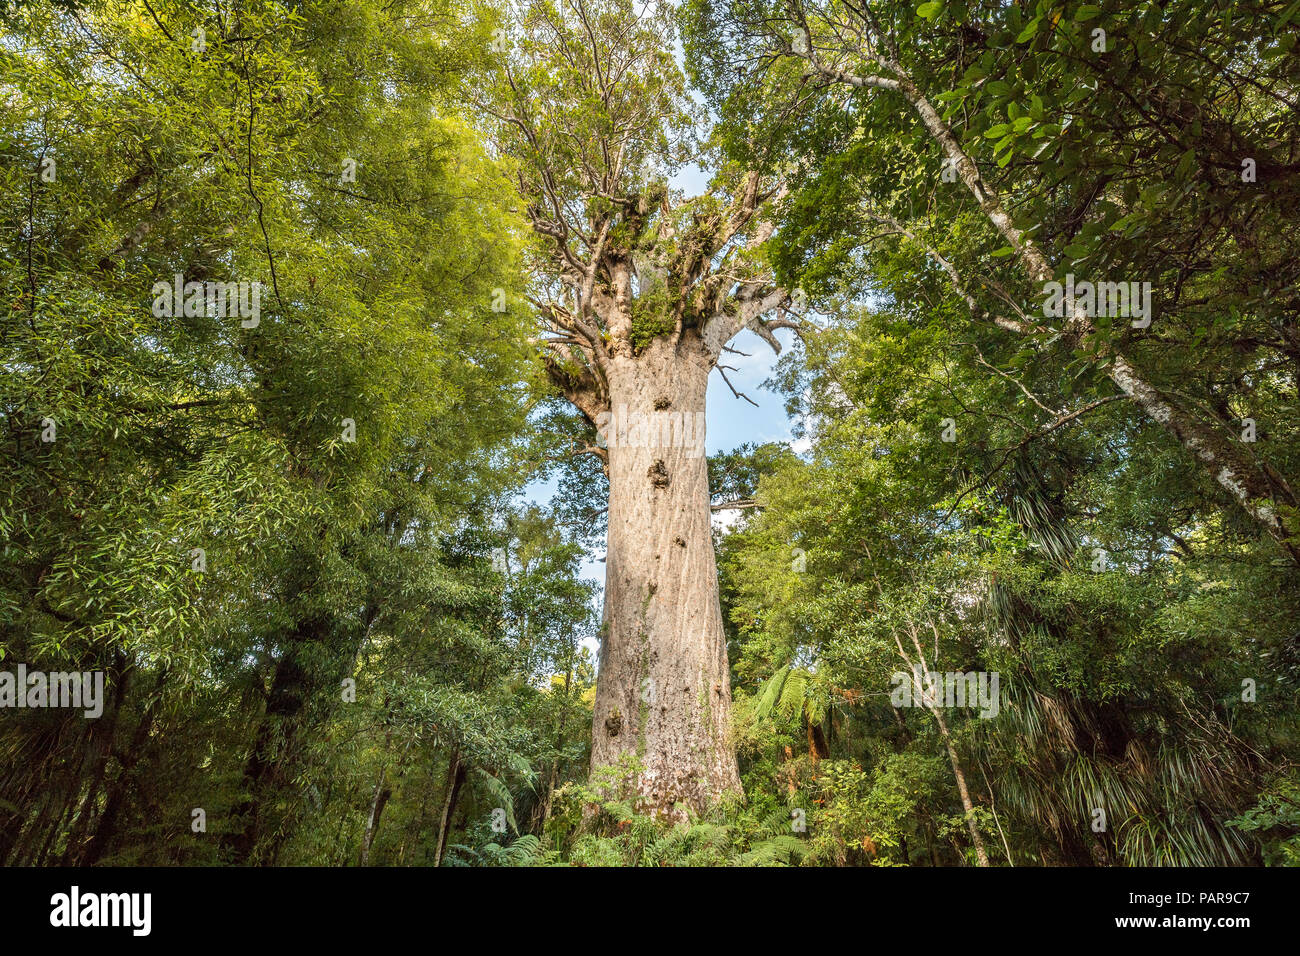 Tane Mahuta, Lord of the Forest, largest Agathis australis (Agathis australis), Waipoua Forest, Northland, North Island Stock Photo